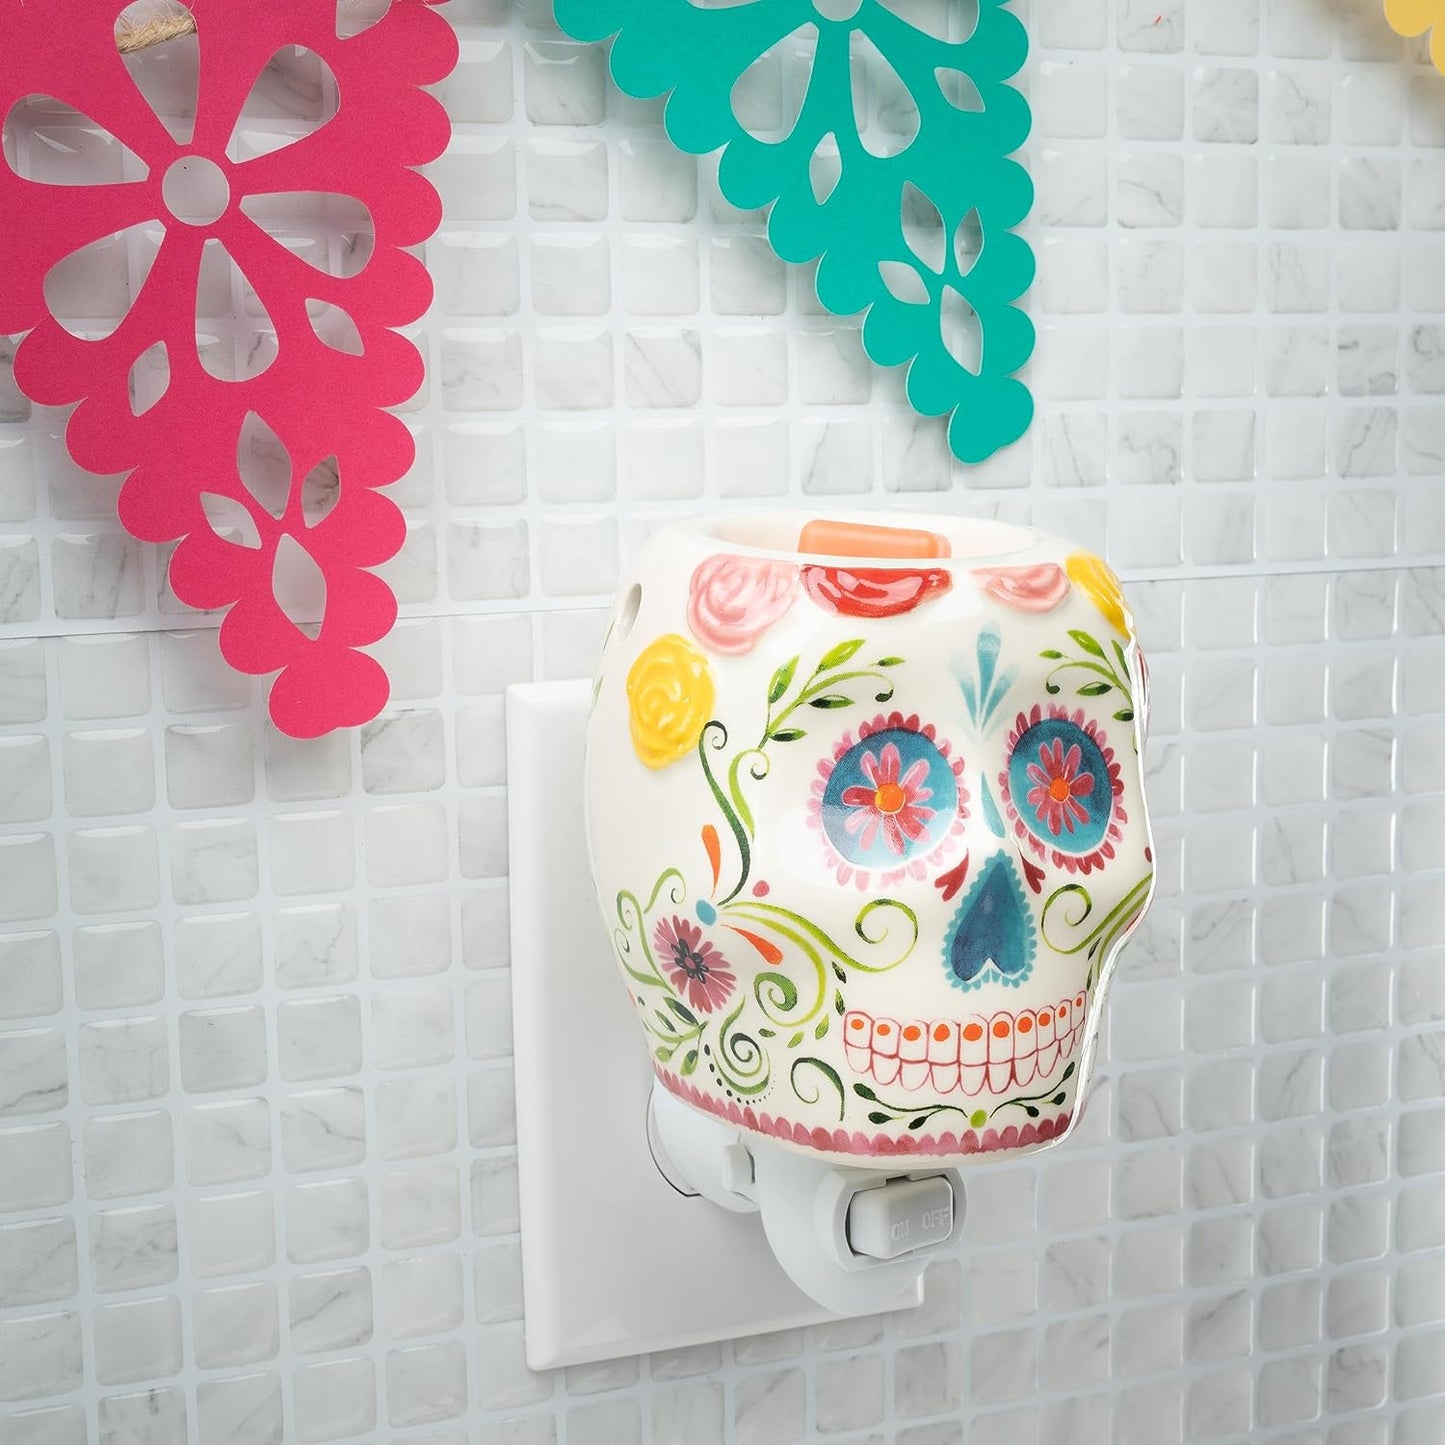 Scentsationals Day of The Dead Collection Scented Wax Cube Warmer Wax Melt Fragrance Melter - Electric Home Air Freshener Home Decor Candle Replacement Dia de Los Muertos Decorations Corona De Flores